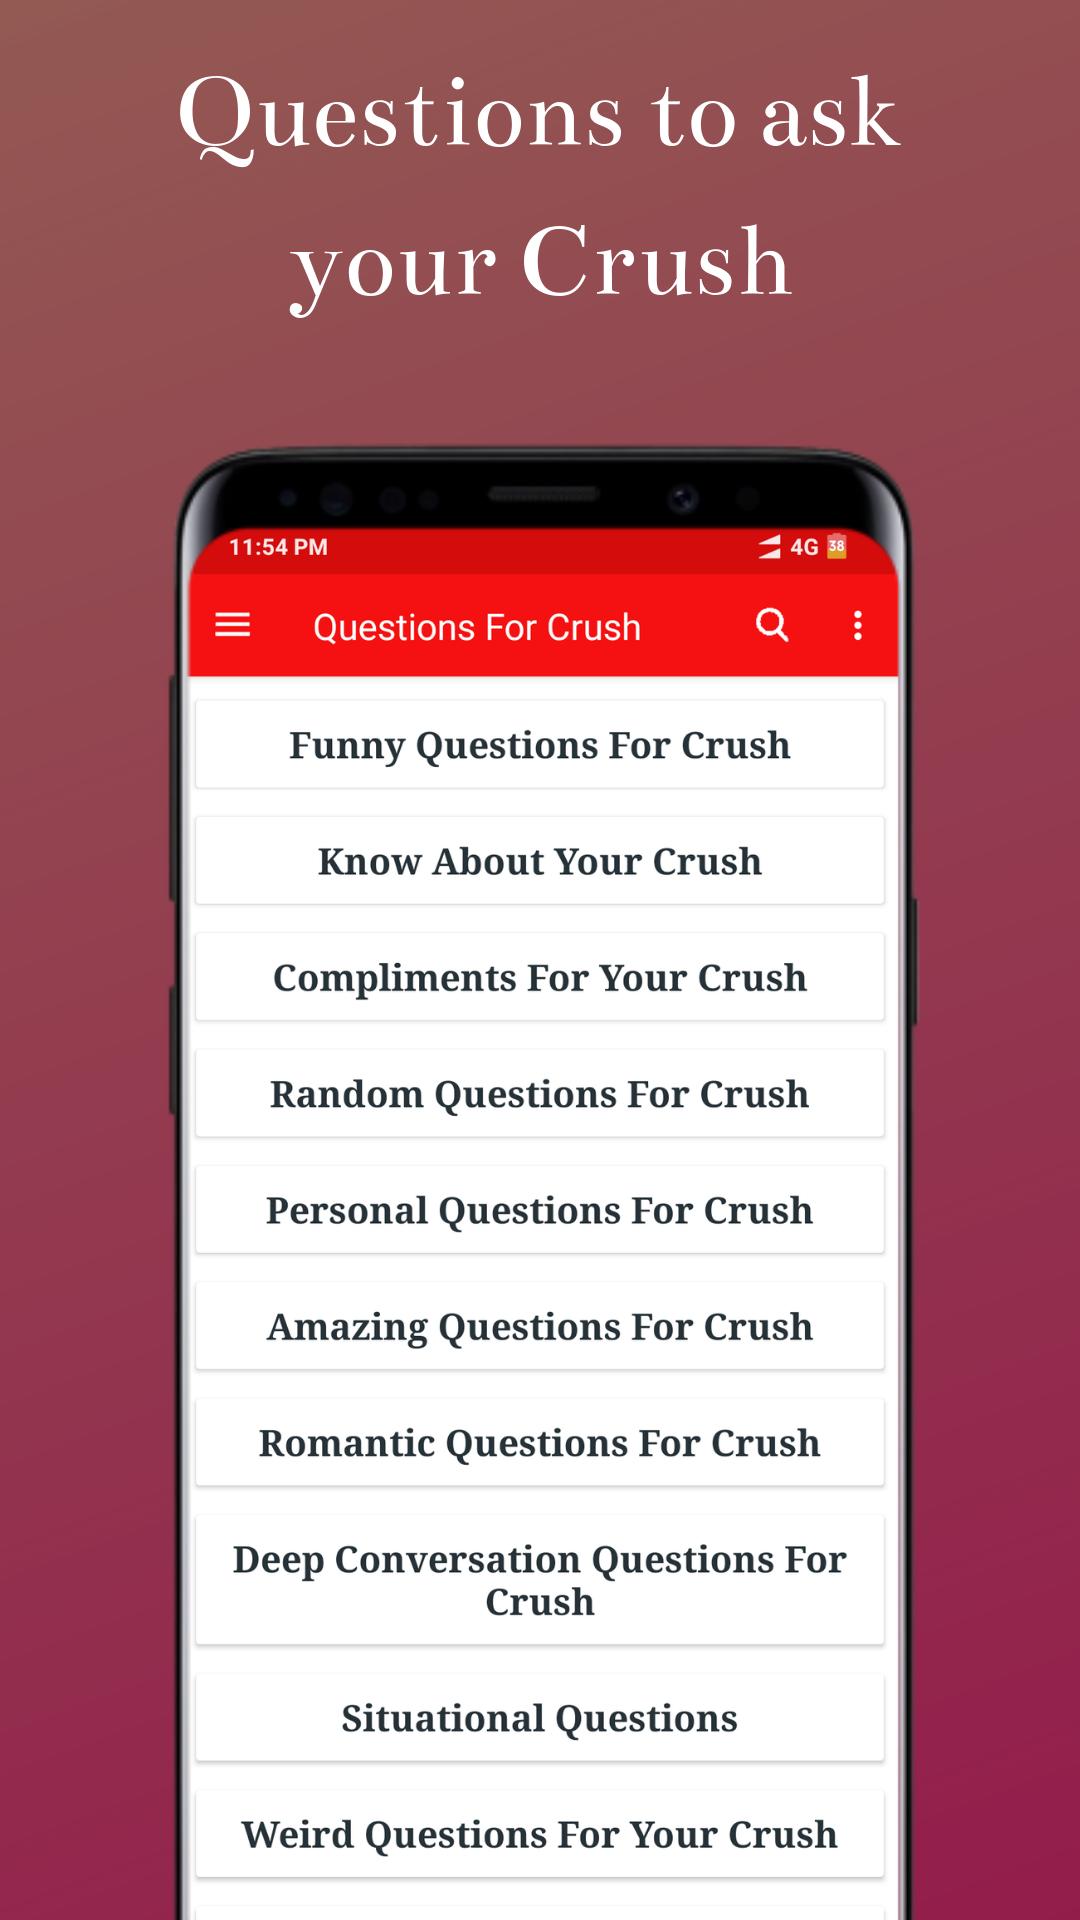 Crush a questions ask to 100 questions